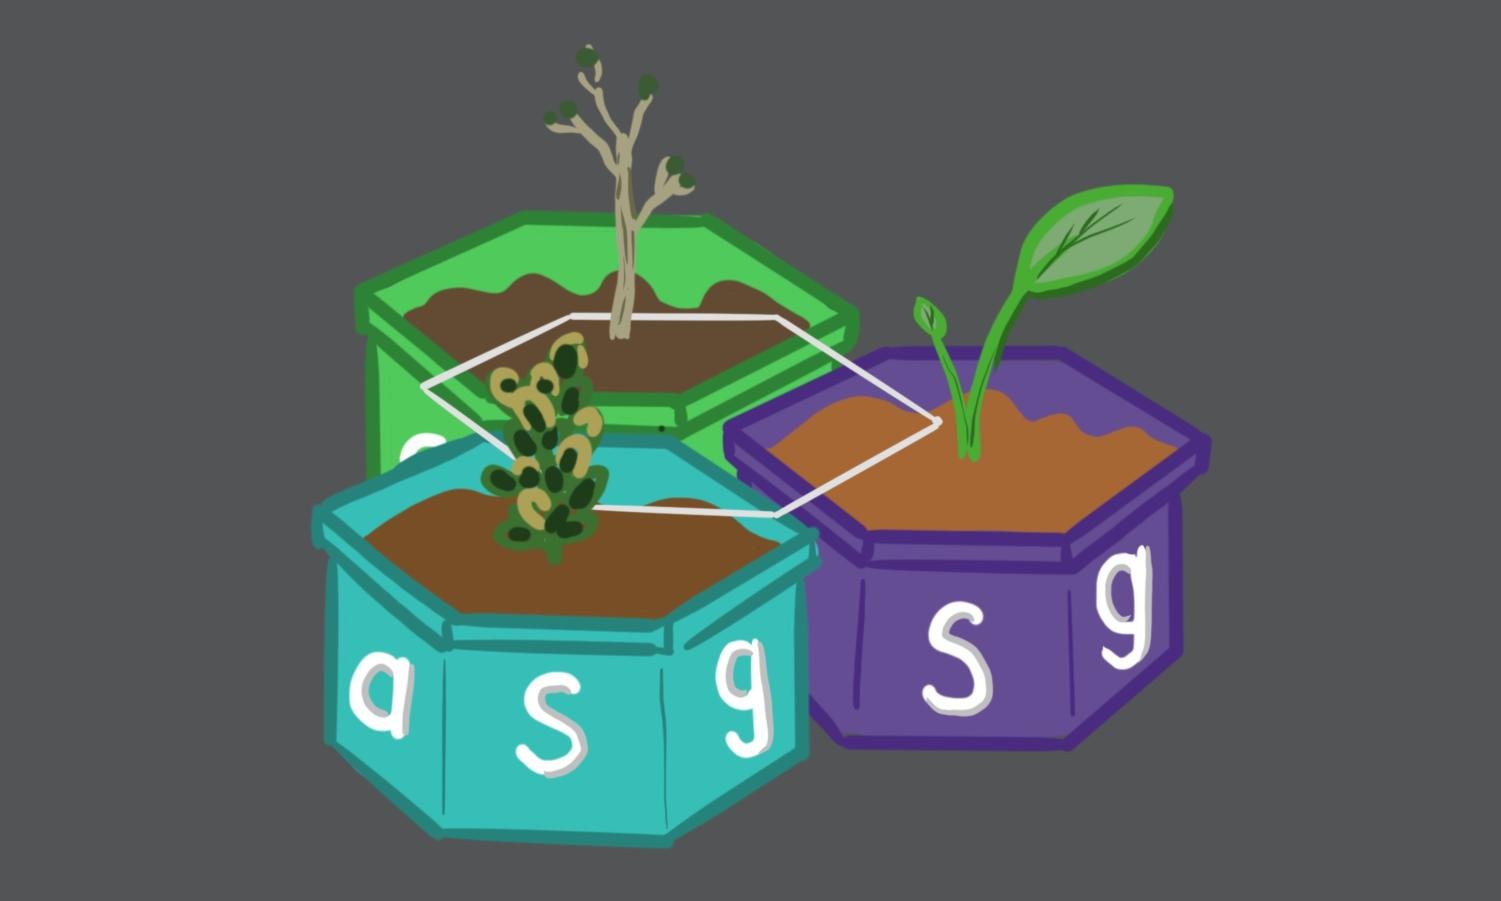 An+illustration+of+three+planters+with+%E2%80%9CASG%E2%80%9D+written+on+two+of+them.